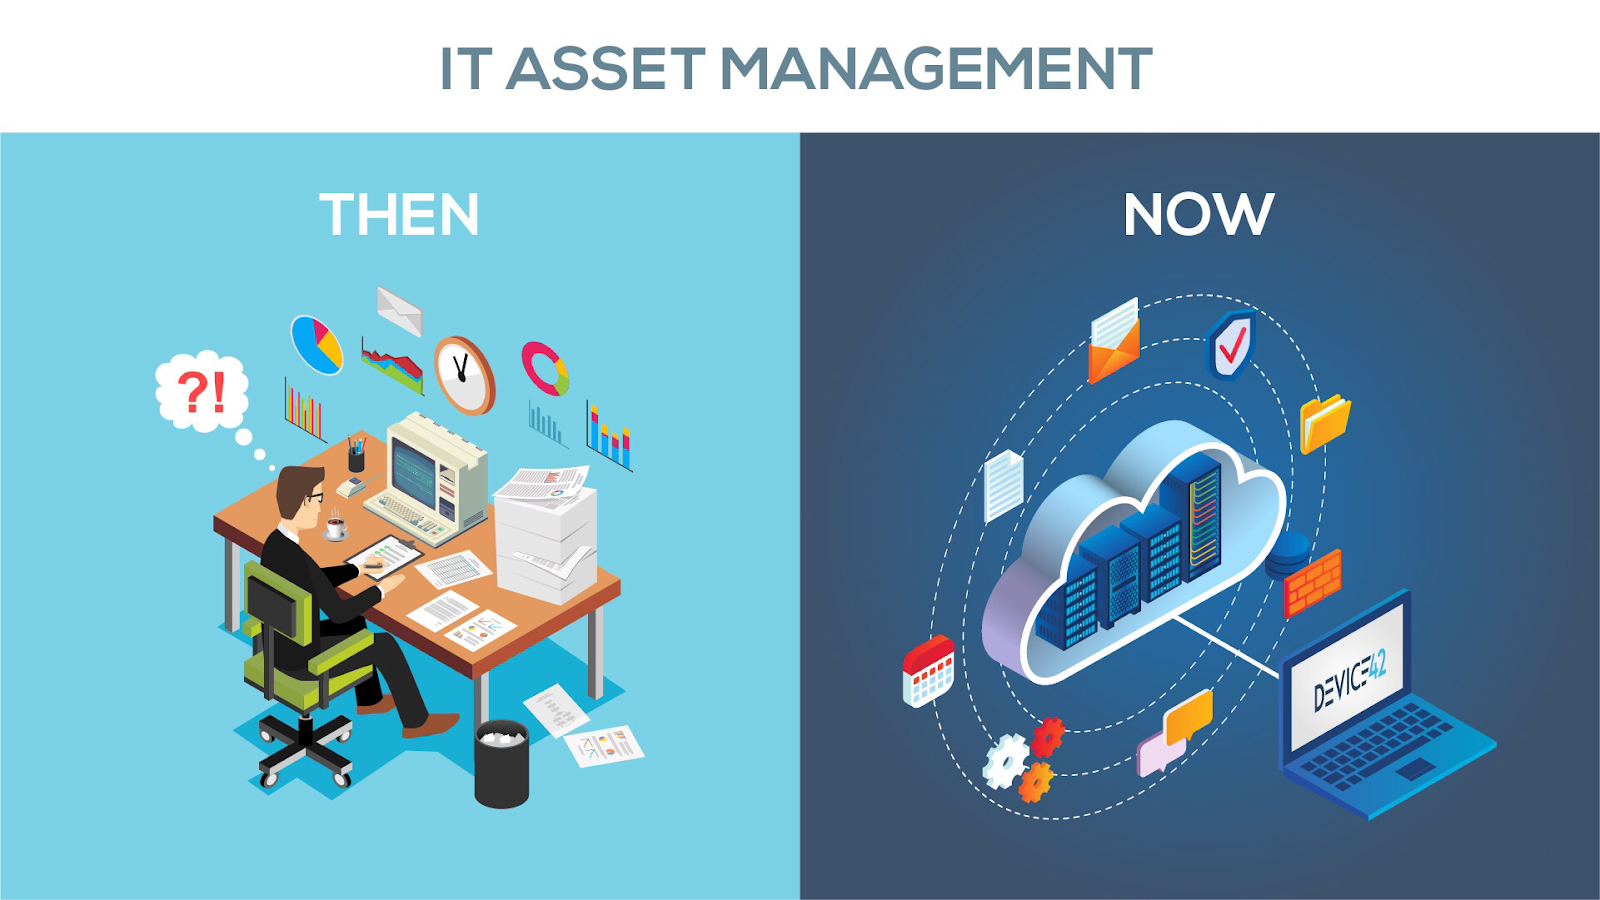 Then and Now ITAM IT Asset Management